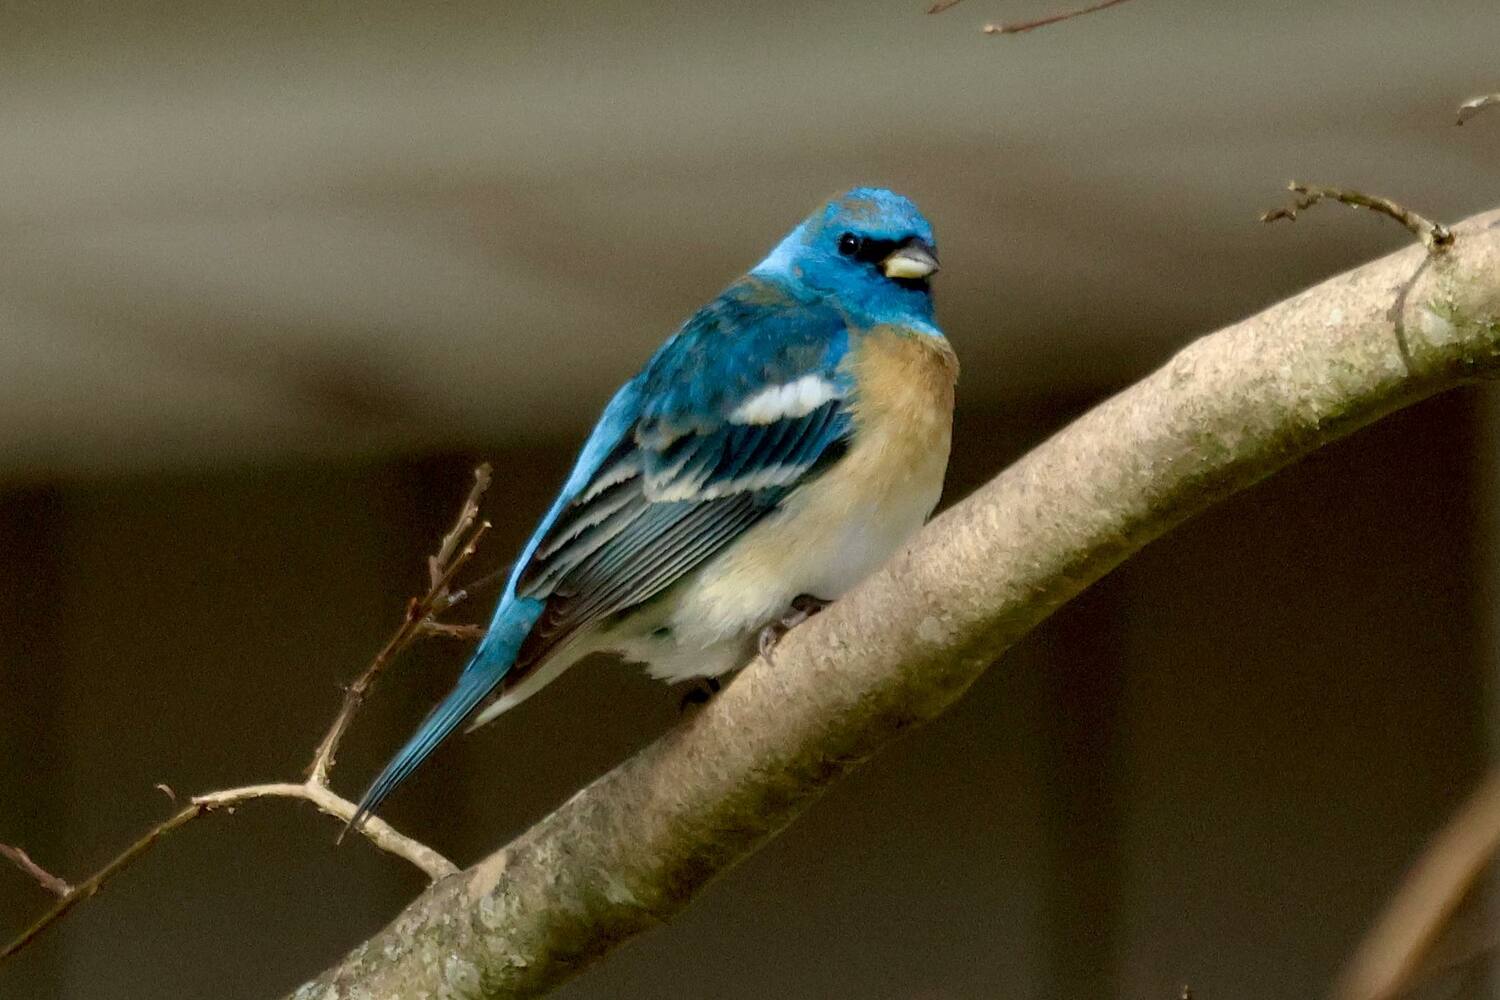 A Lazuli Bunting, a bird normally only seen out west, has been showing up to the bird feeder at Meigan Madden Rocco's home in Flanders for several days. It has drawn hundreds of birders to her home. She and her family have affectionately named the bird 